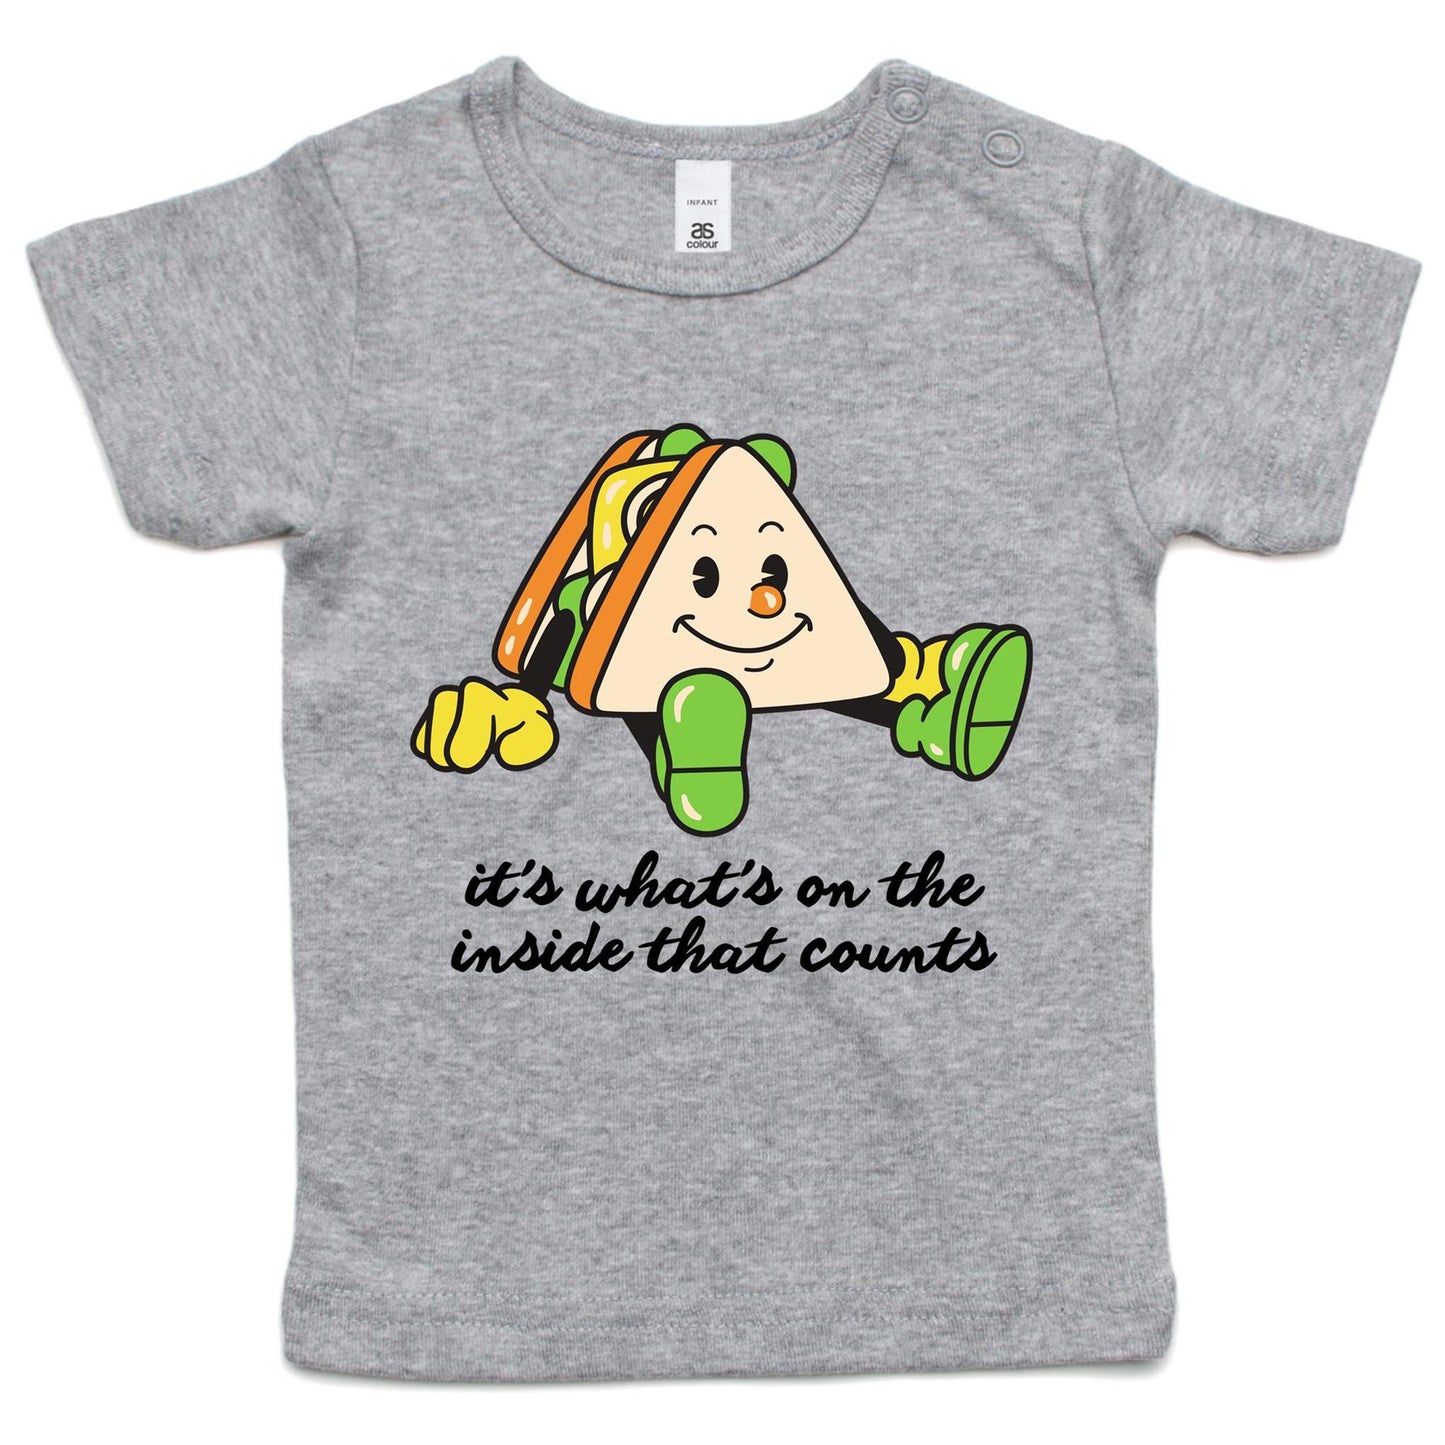 Sandwich, It's What's On The Inside That Counts - Baby T-shirt Grey Marle Baby T-shirt Food Motivation